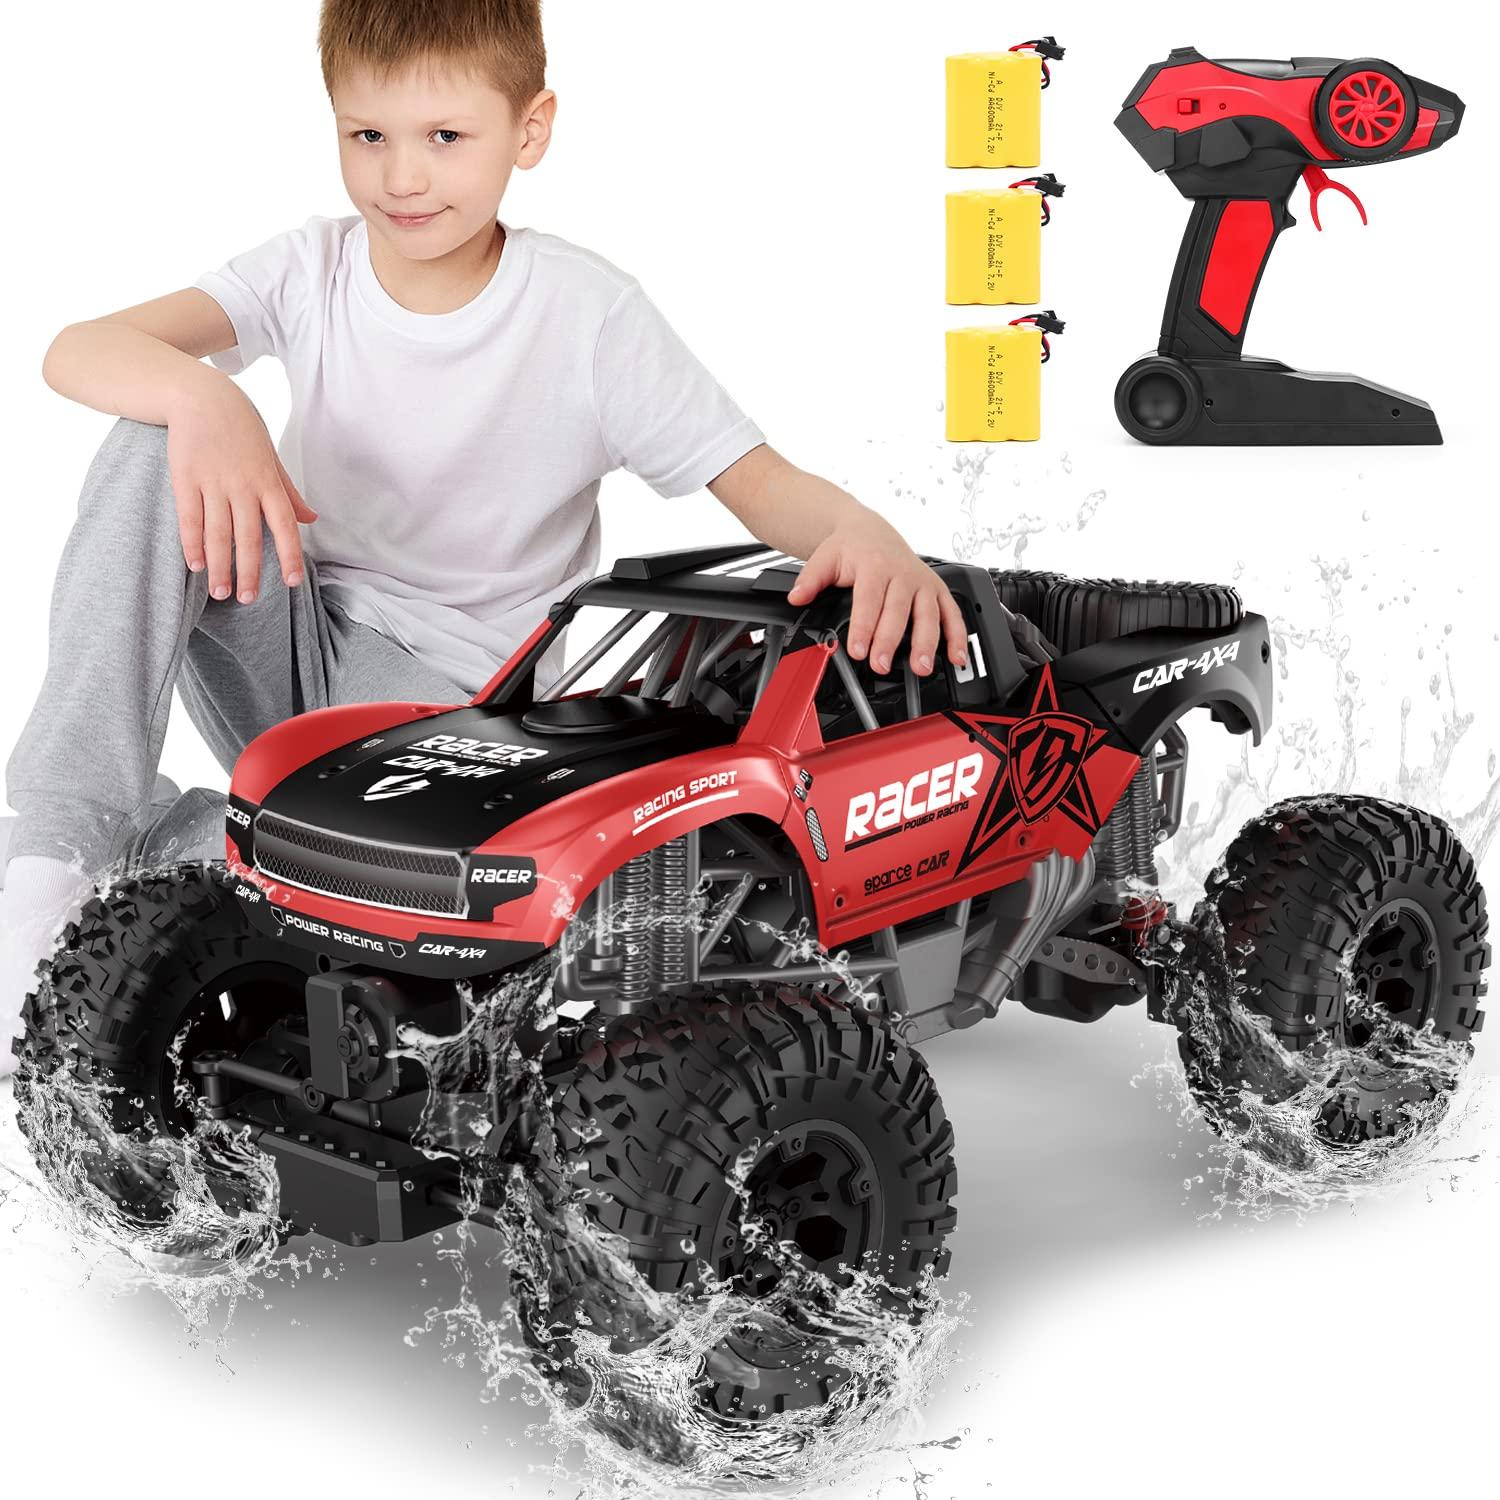 Cheap Gas Rc Truck: Top-Performing RC Trucks at Affordable Prices